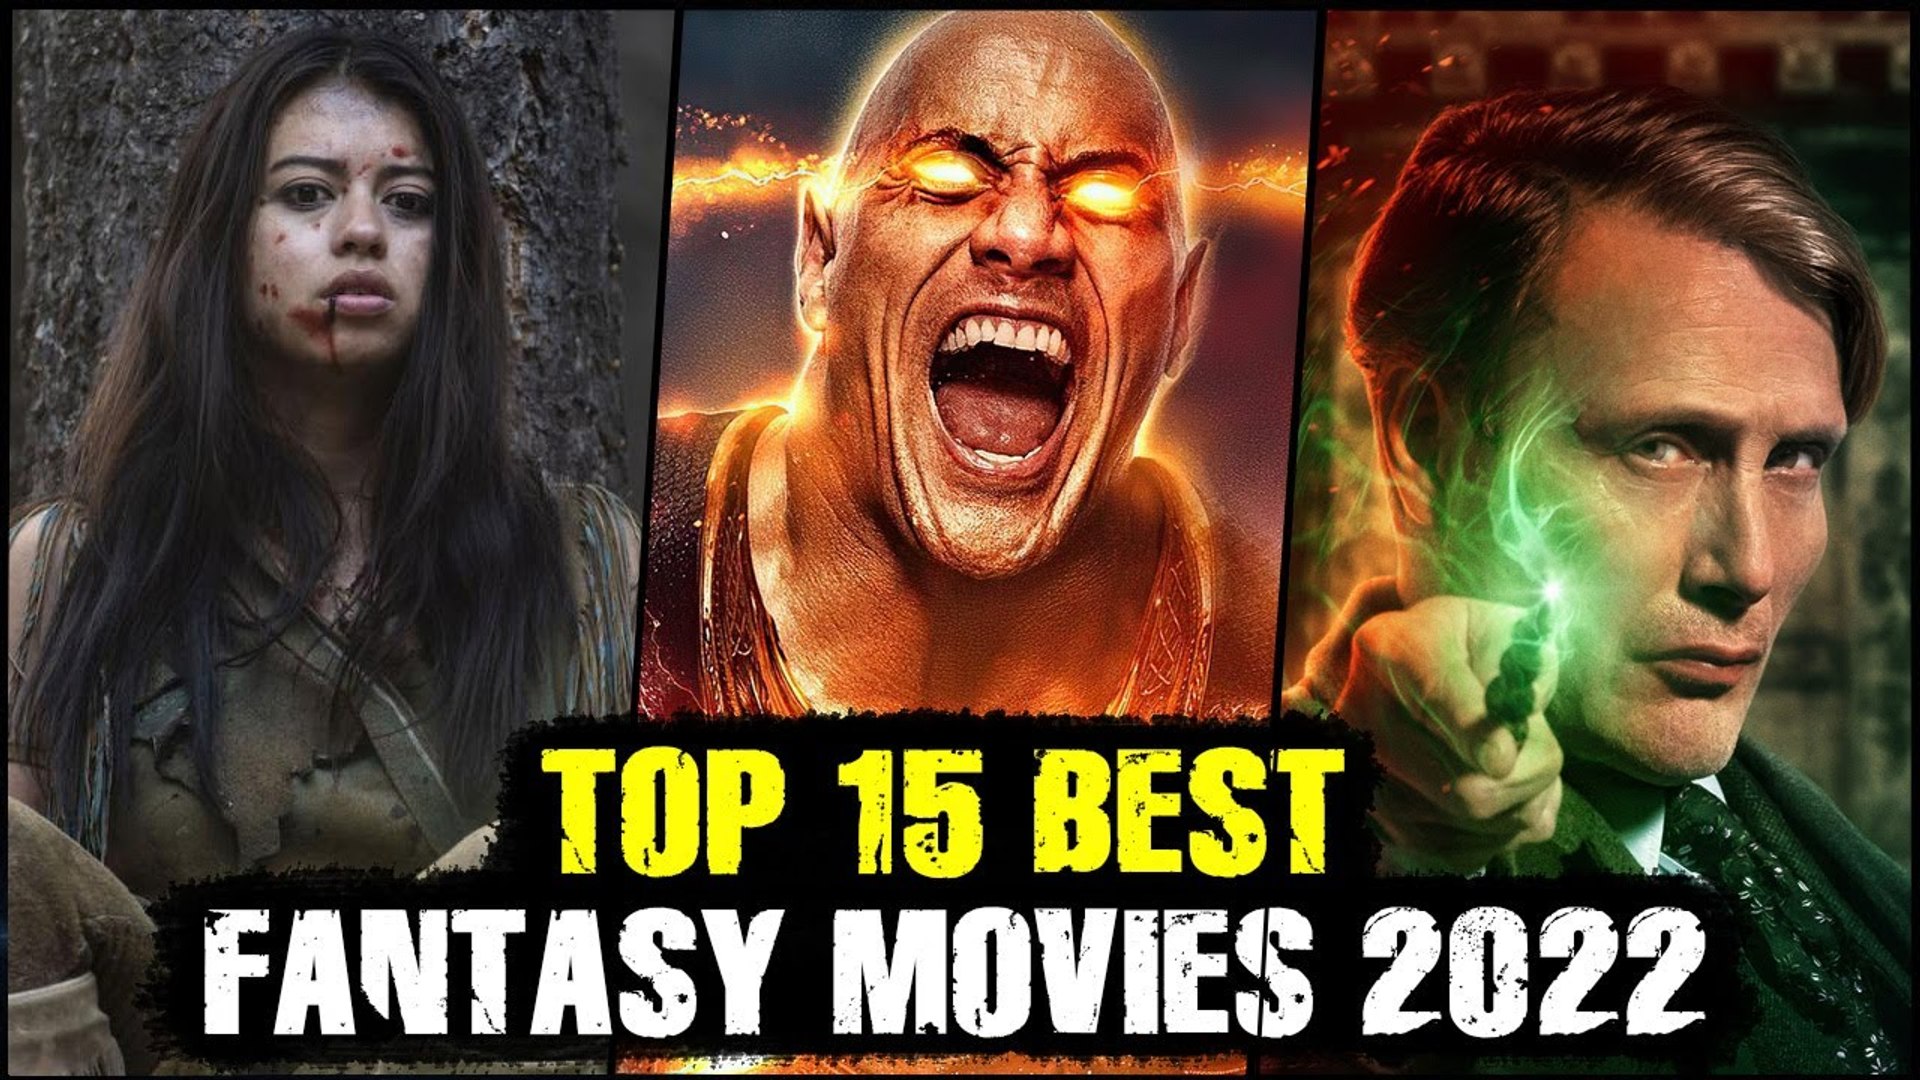 Top 15 Best Fantasy Movies 2022 Top Movies 2022 - video Dailymotion